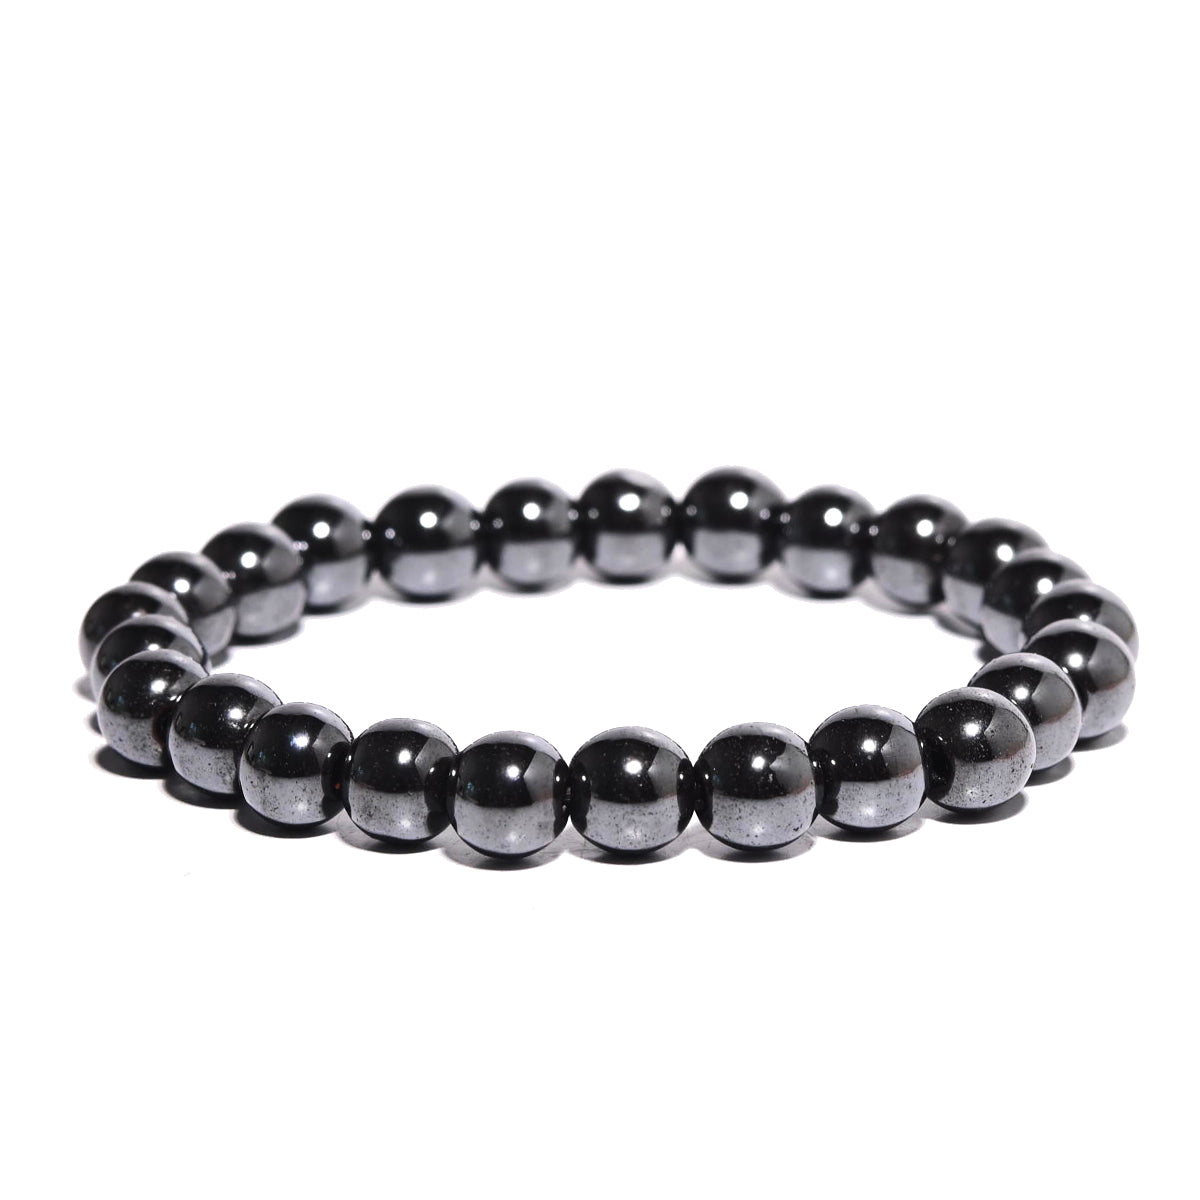 Natural Hematite (non magnetic) Semi-Precious FACETED Round Gemstone Crystal  Bracelet, Sample Strand - 4mm - 1 Count - 7.5 inches - OrientalDirect.co.uk